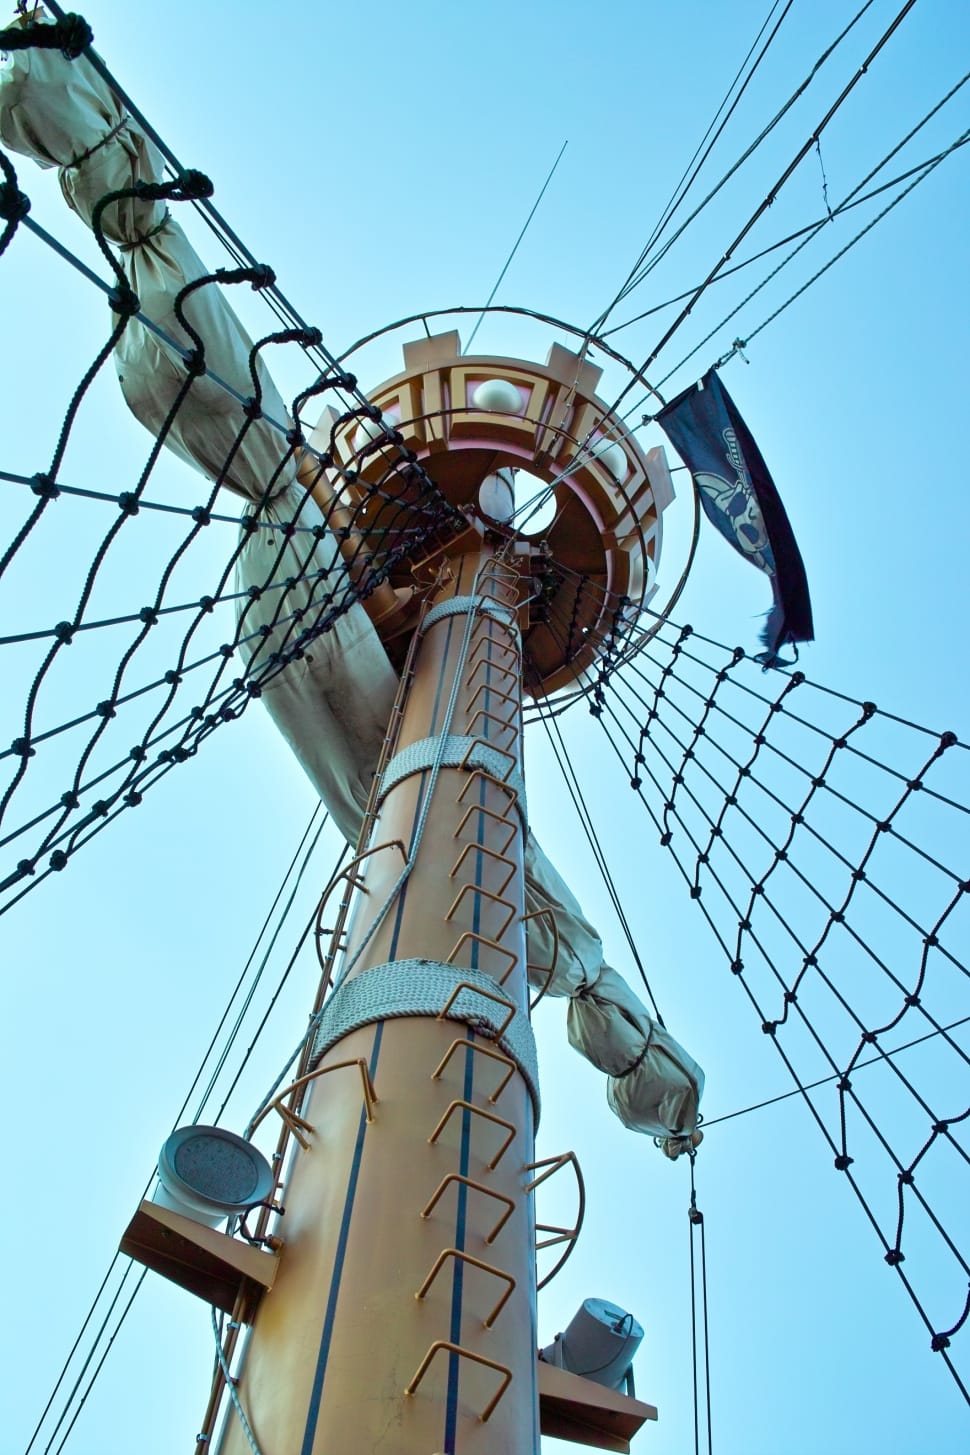 Mast, Pirate Ship, Pirate Flag, low angle view, industry preview